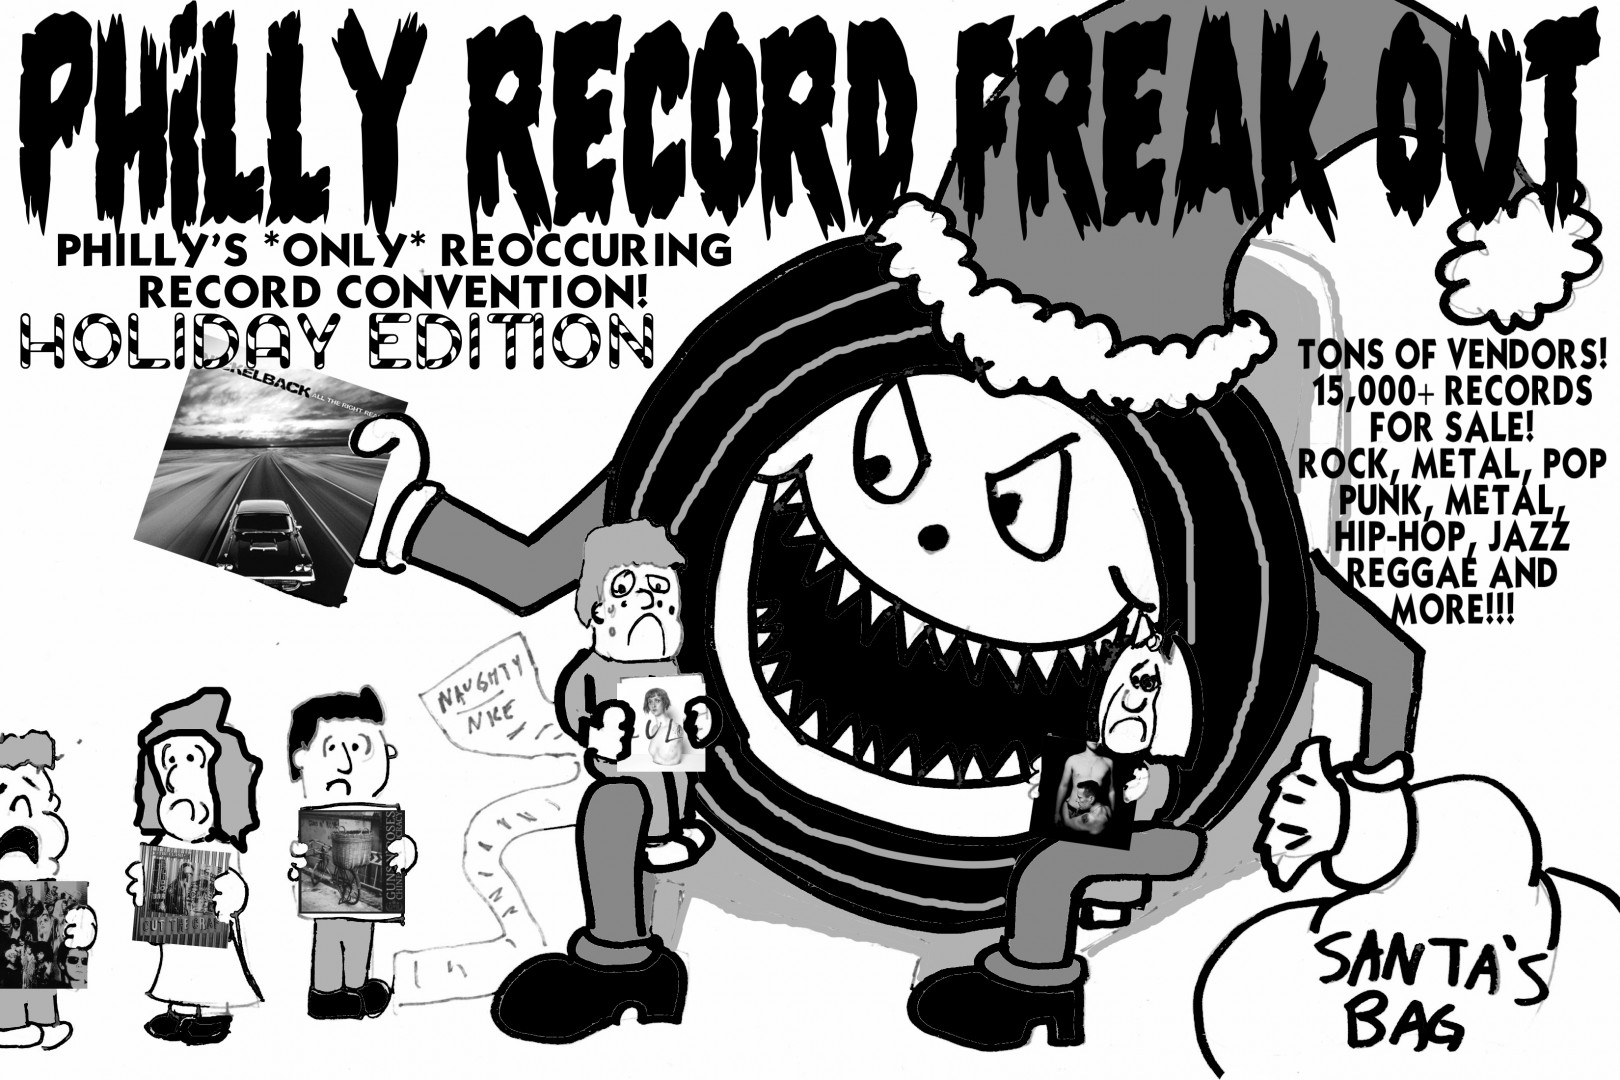 The Philly Record Freak Out - Holiday Edition - is December 2 at Philamoca!